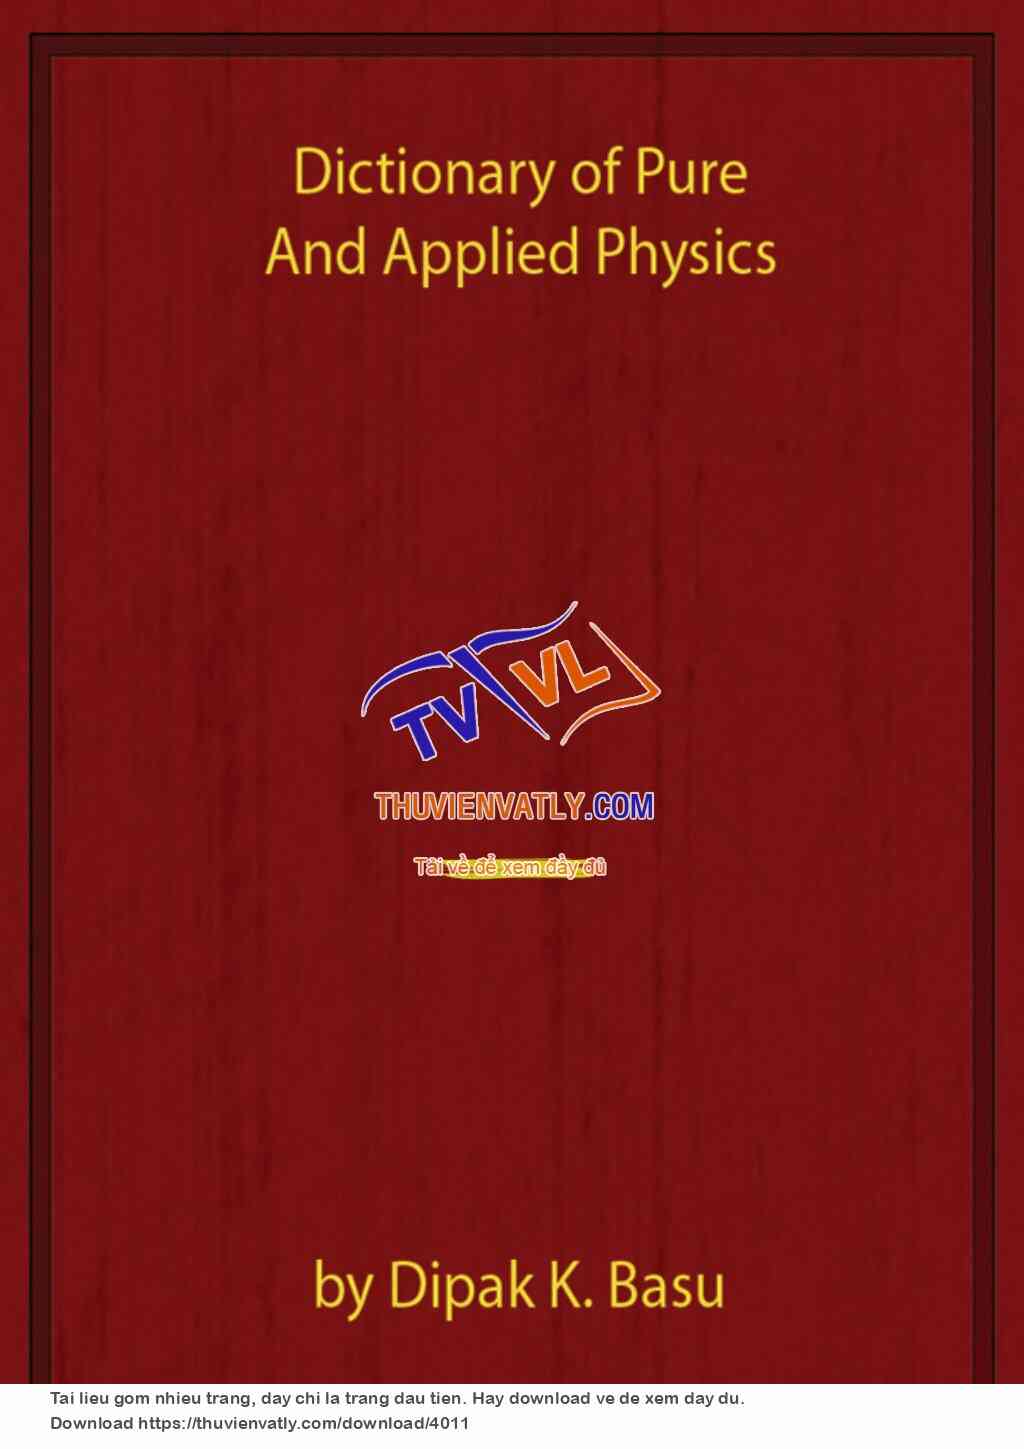 Dictionary of Pure and Applied Physics - Part 2